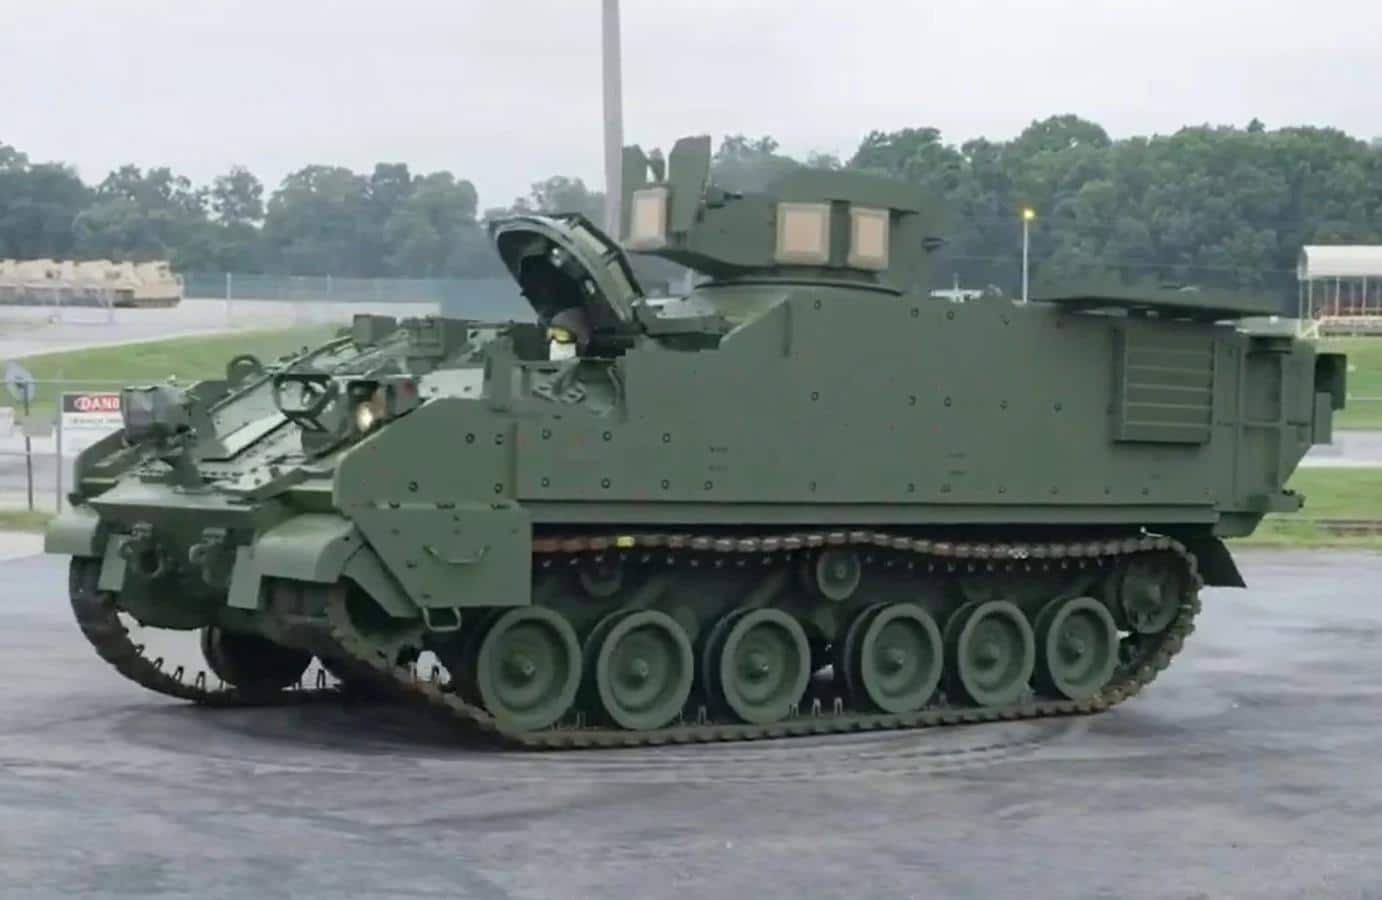 The newest tracked vehicles of the US Army will get new covers, i.e. the AMPV from OCWS